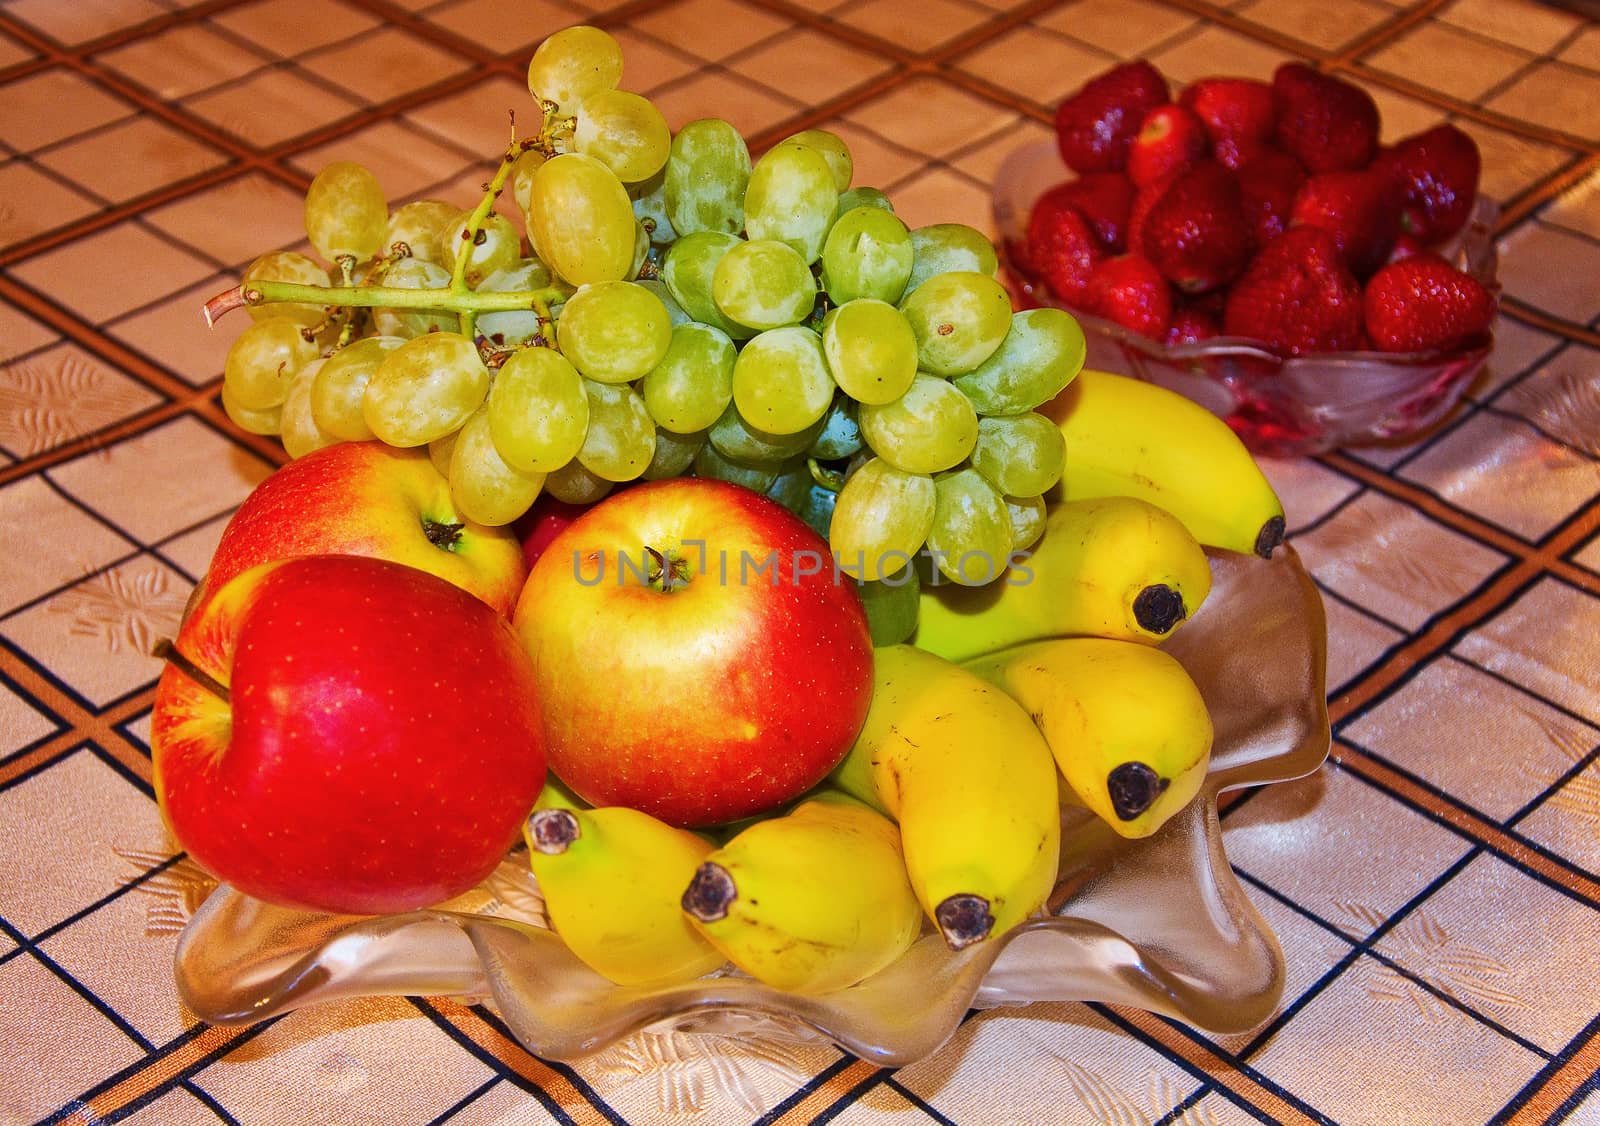 Table served with fresh fruit

vase, apples, grapes, bananas, serving, vitamins, fresh, natural, pure, washed, useful,